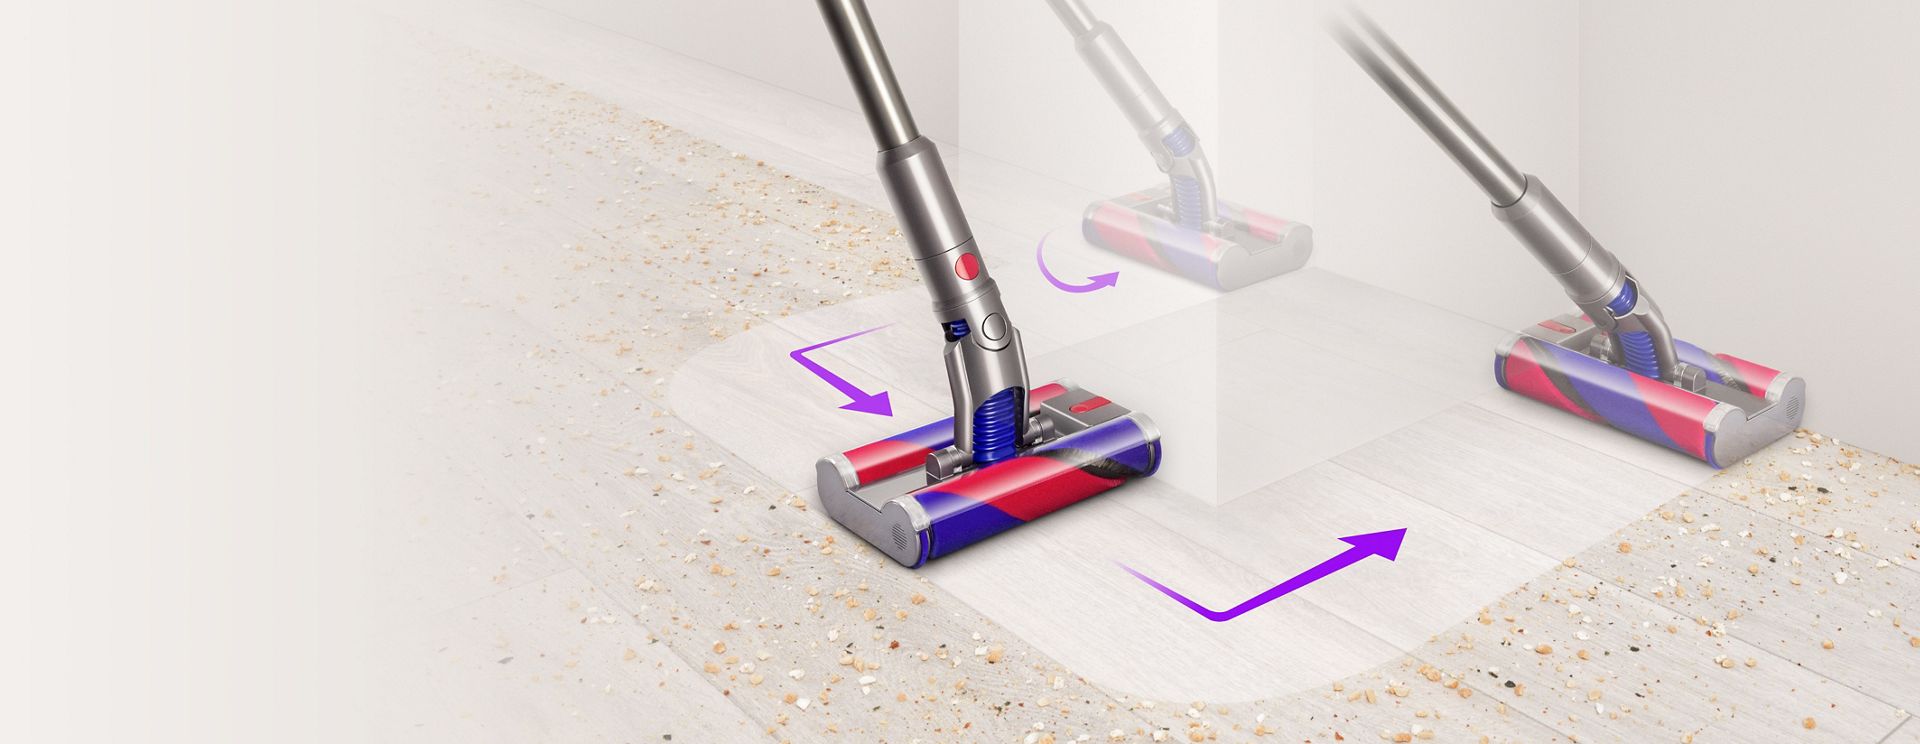 Dyson Omni-glide vacuum manoeuvring around obstacles